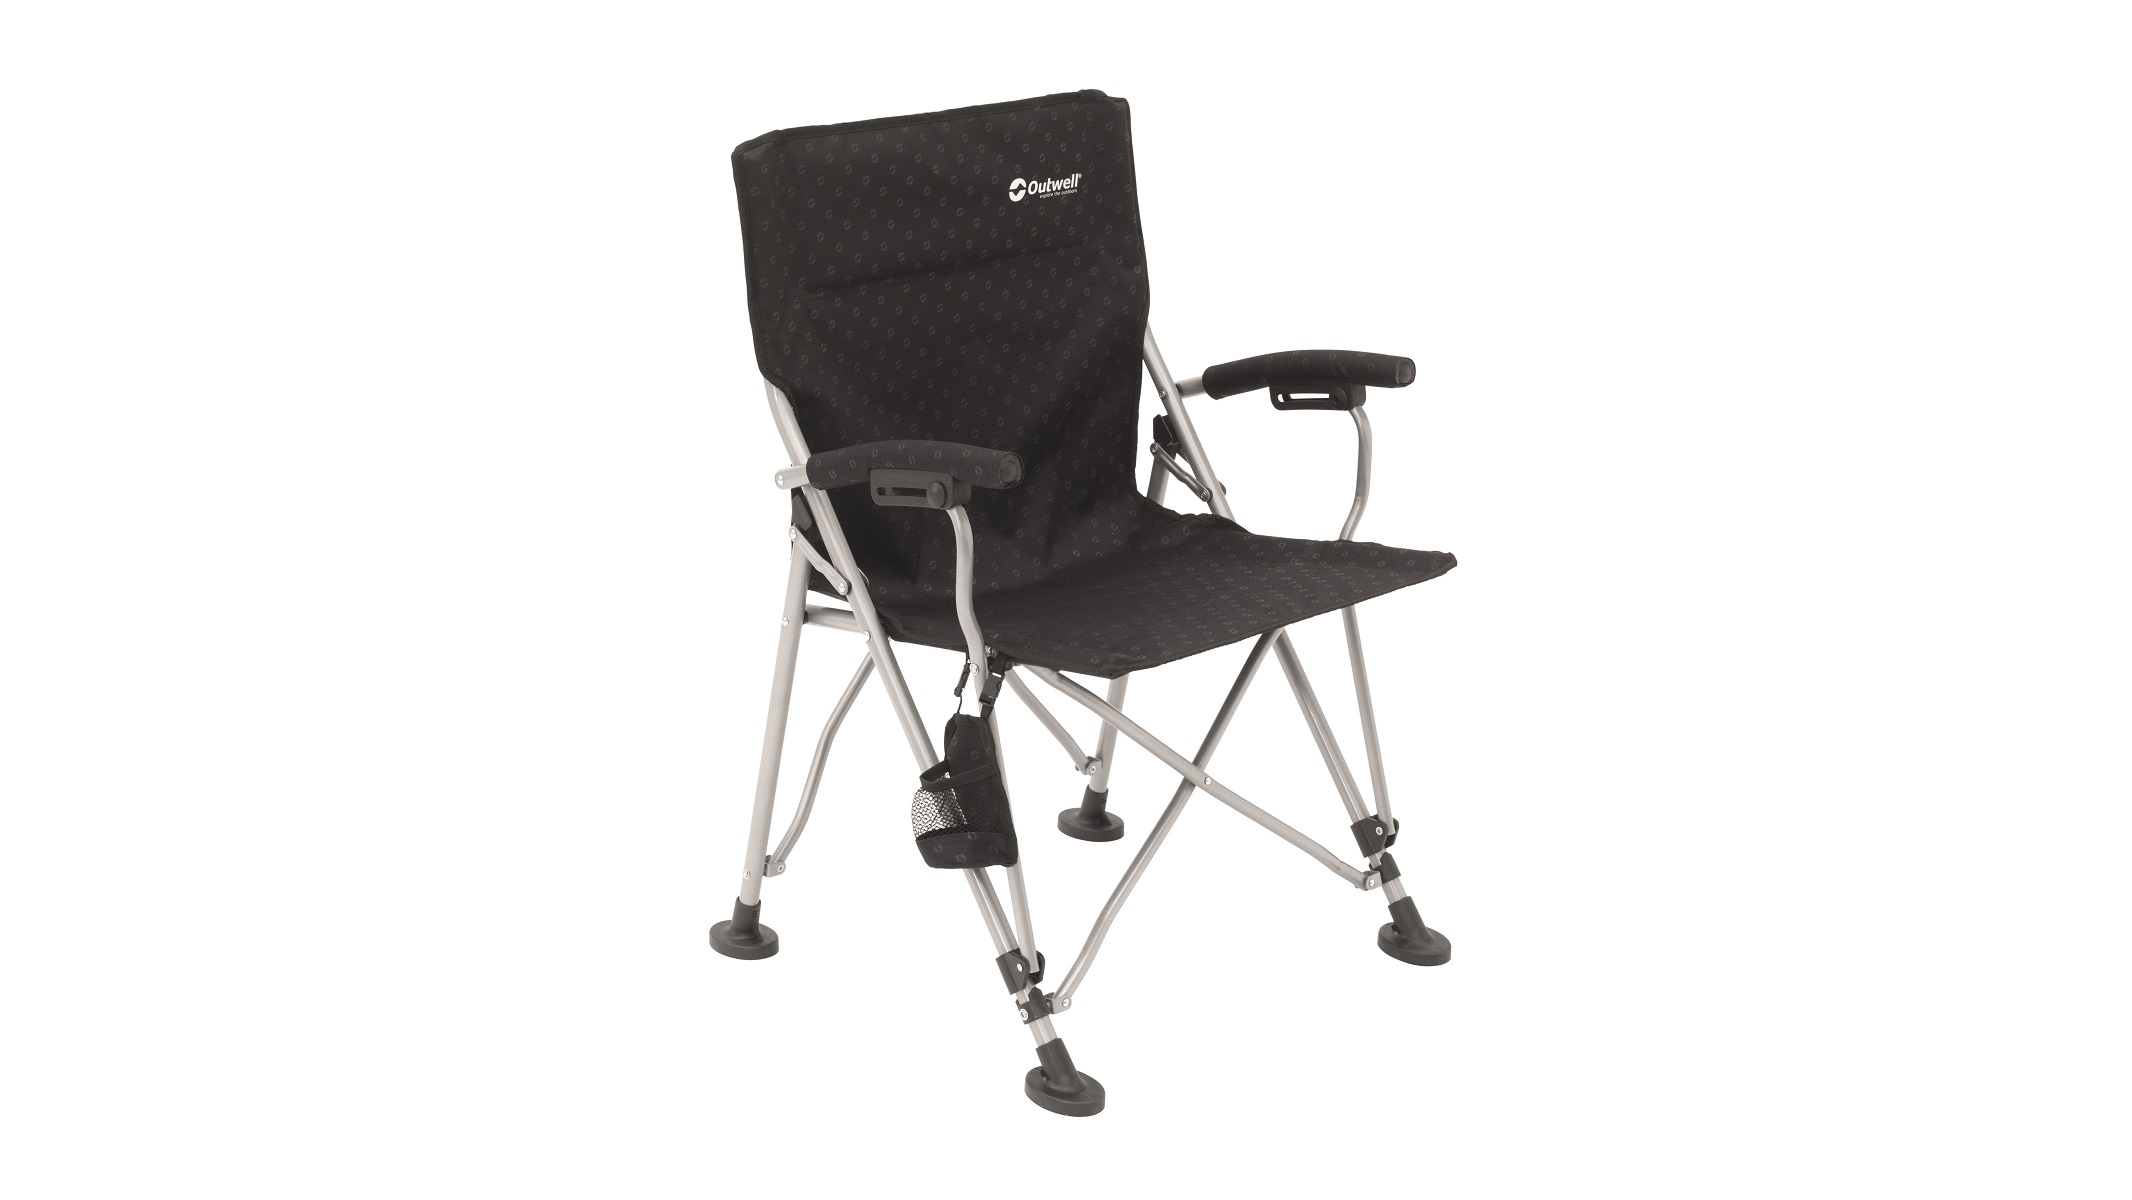 Outwell - Campo Black Foldable chair with Padded Armrests 2022 (470233)